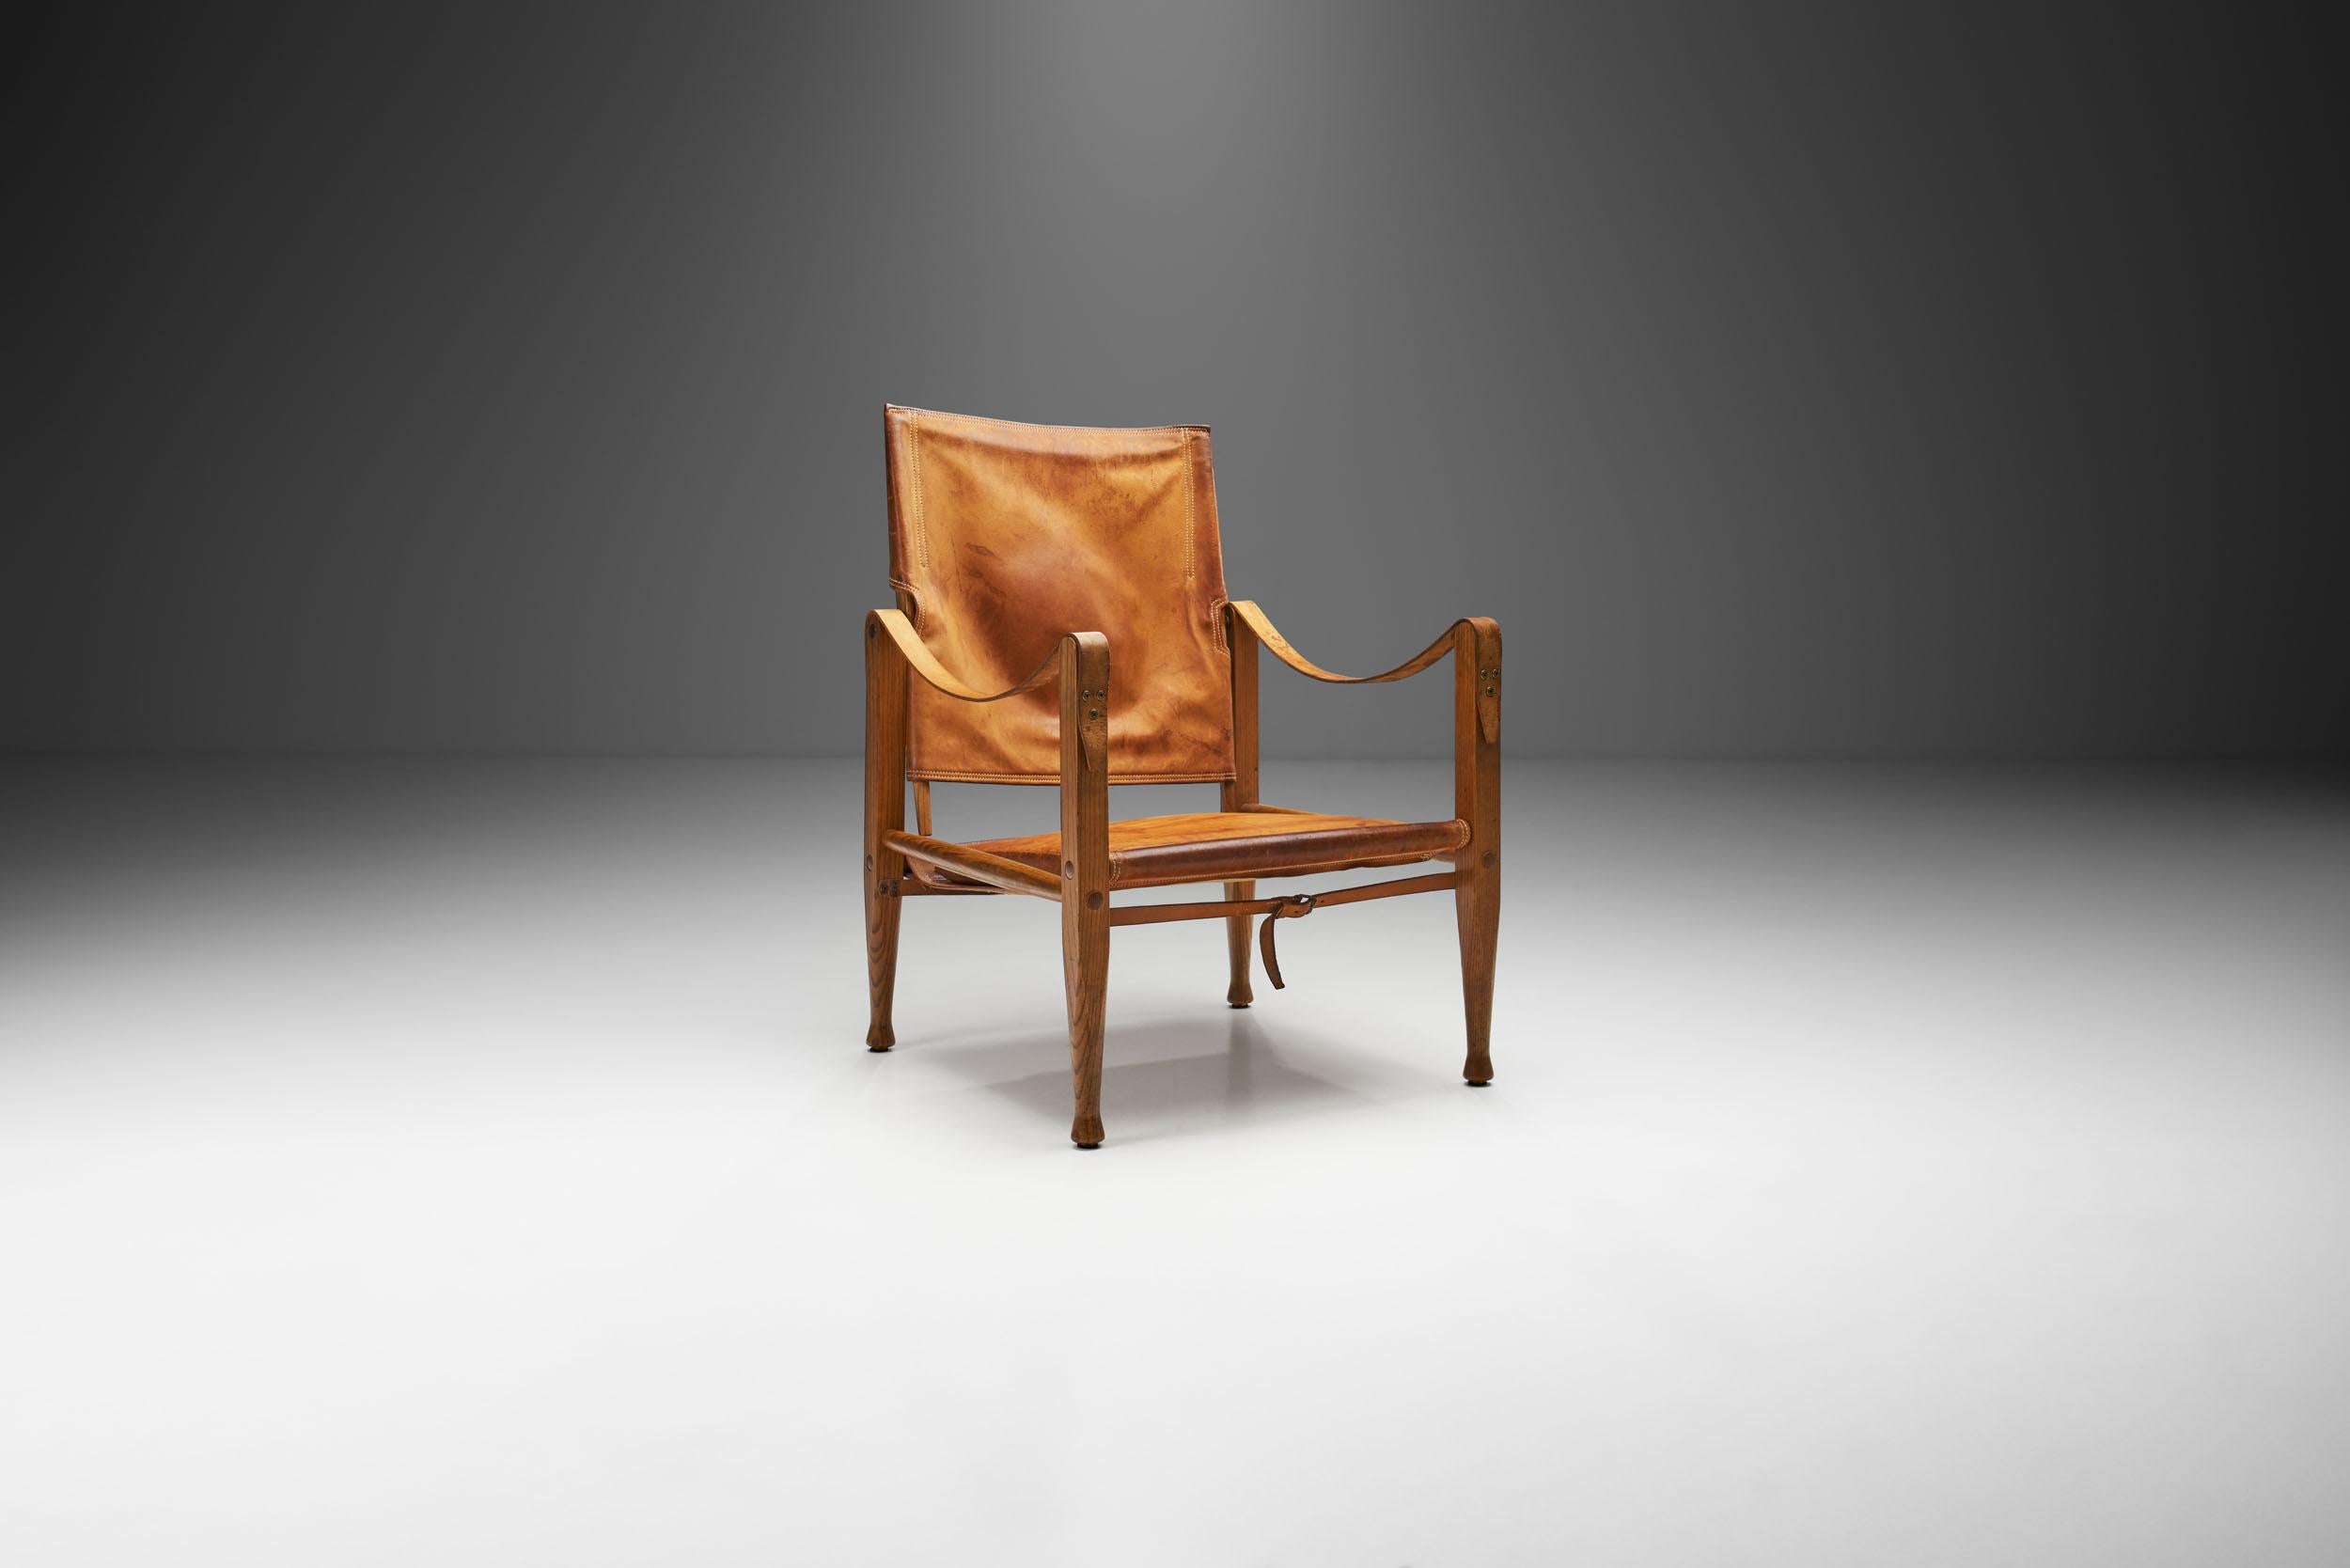 Kaare Klint’s “KK47000” Safari chair is a refined version of the chairs brought on an African safari by an American cinematographer and his wife. Klint noticed the chairs in the couple’s photos, and they were most likely based on Roorkhee Chairs,